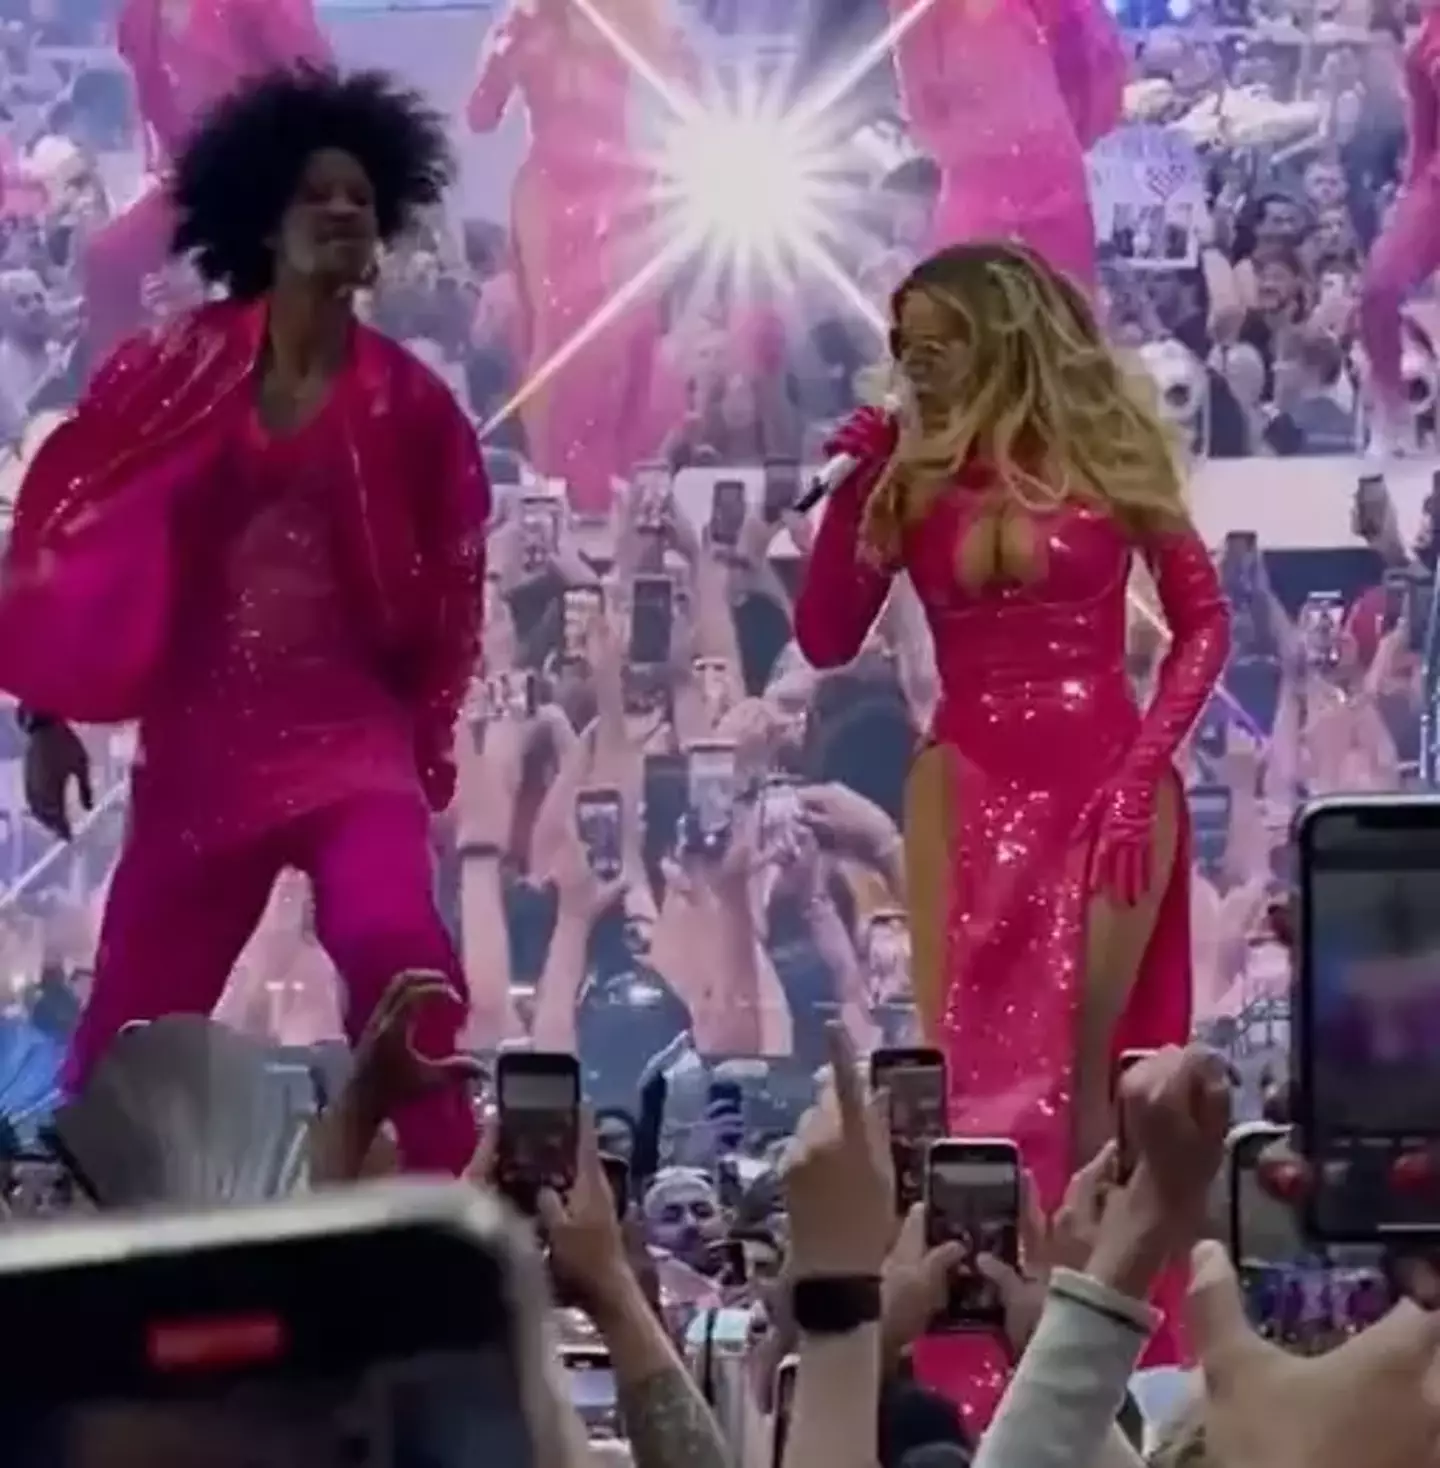 Beyonce narrowly missed a mid-performance wardrobe malfunction.